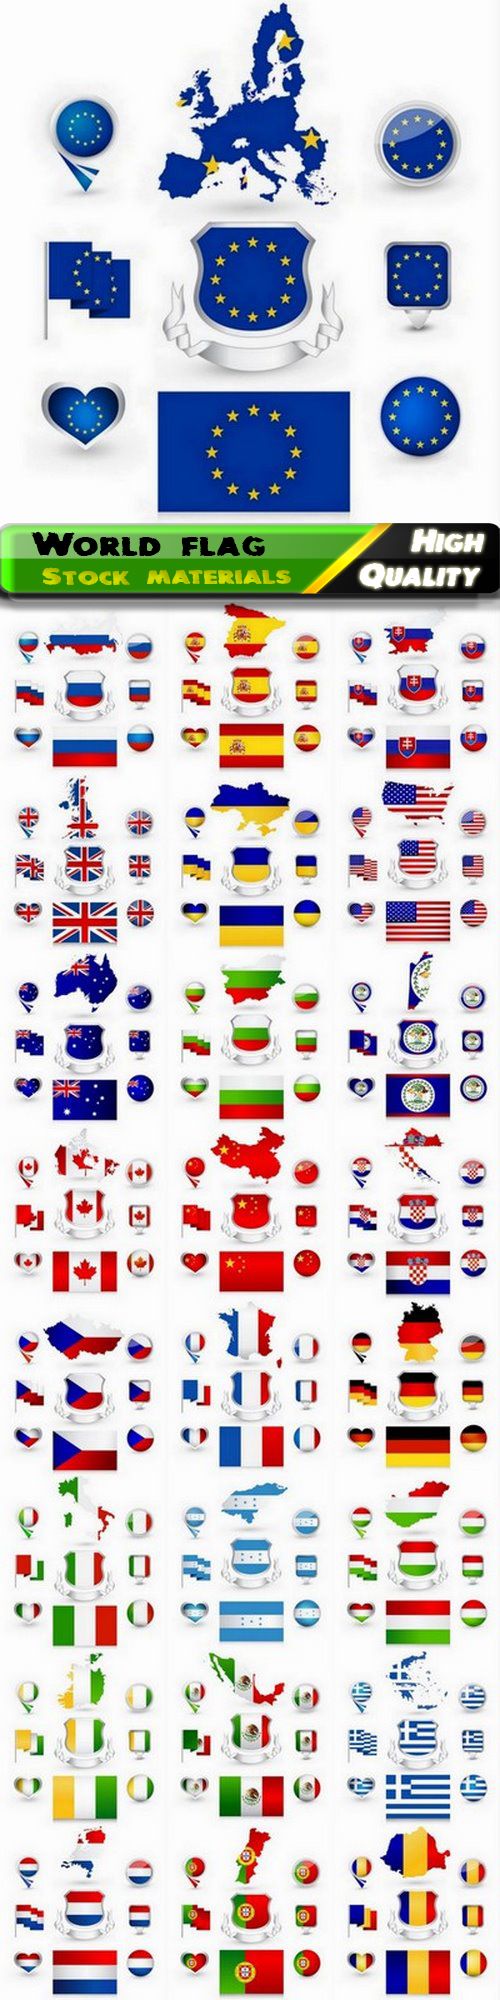 World flag and button with country map - 25 Eps